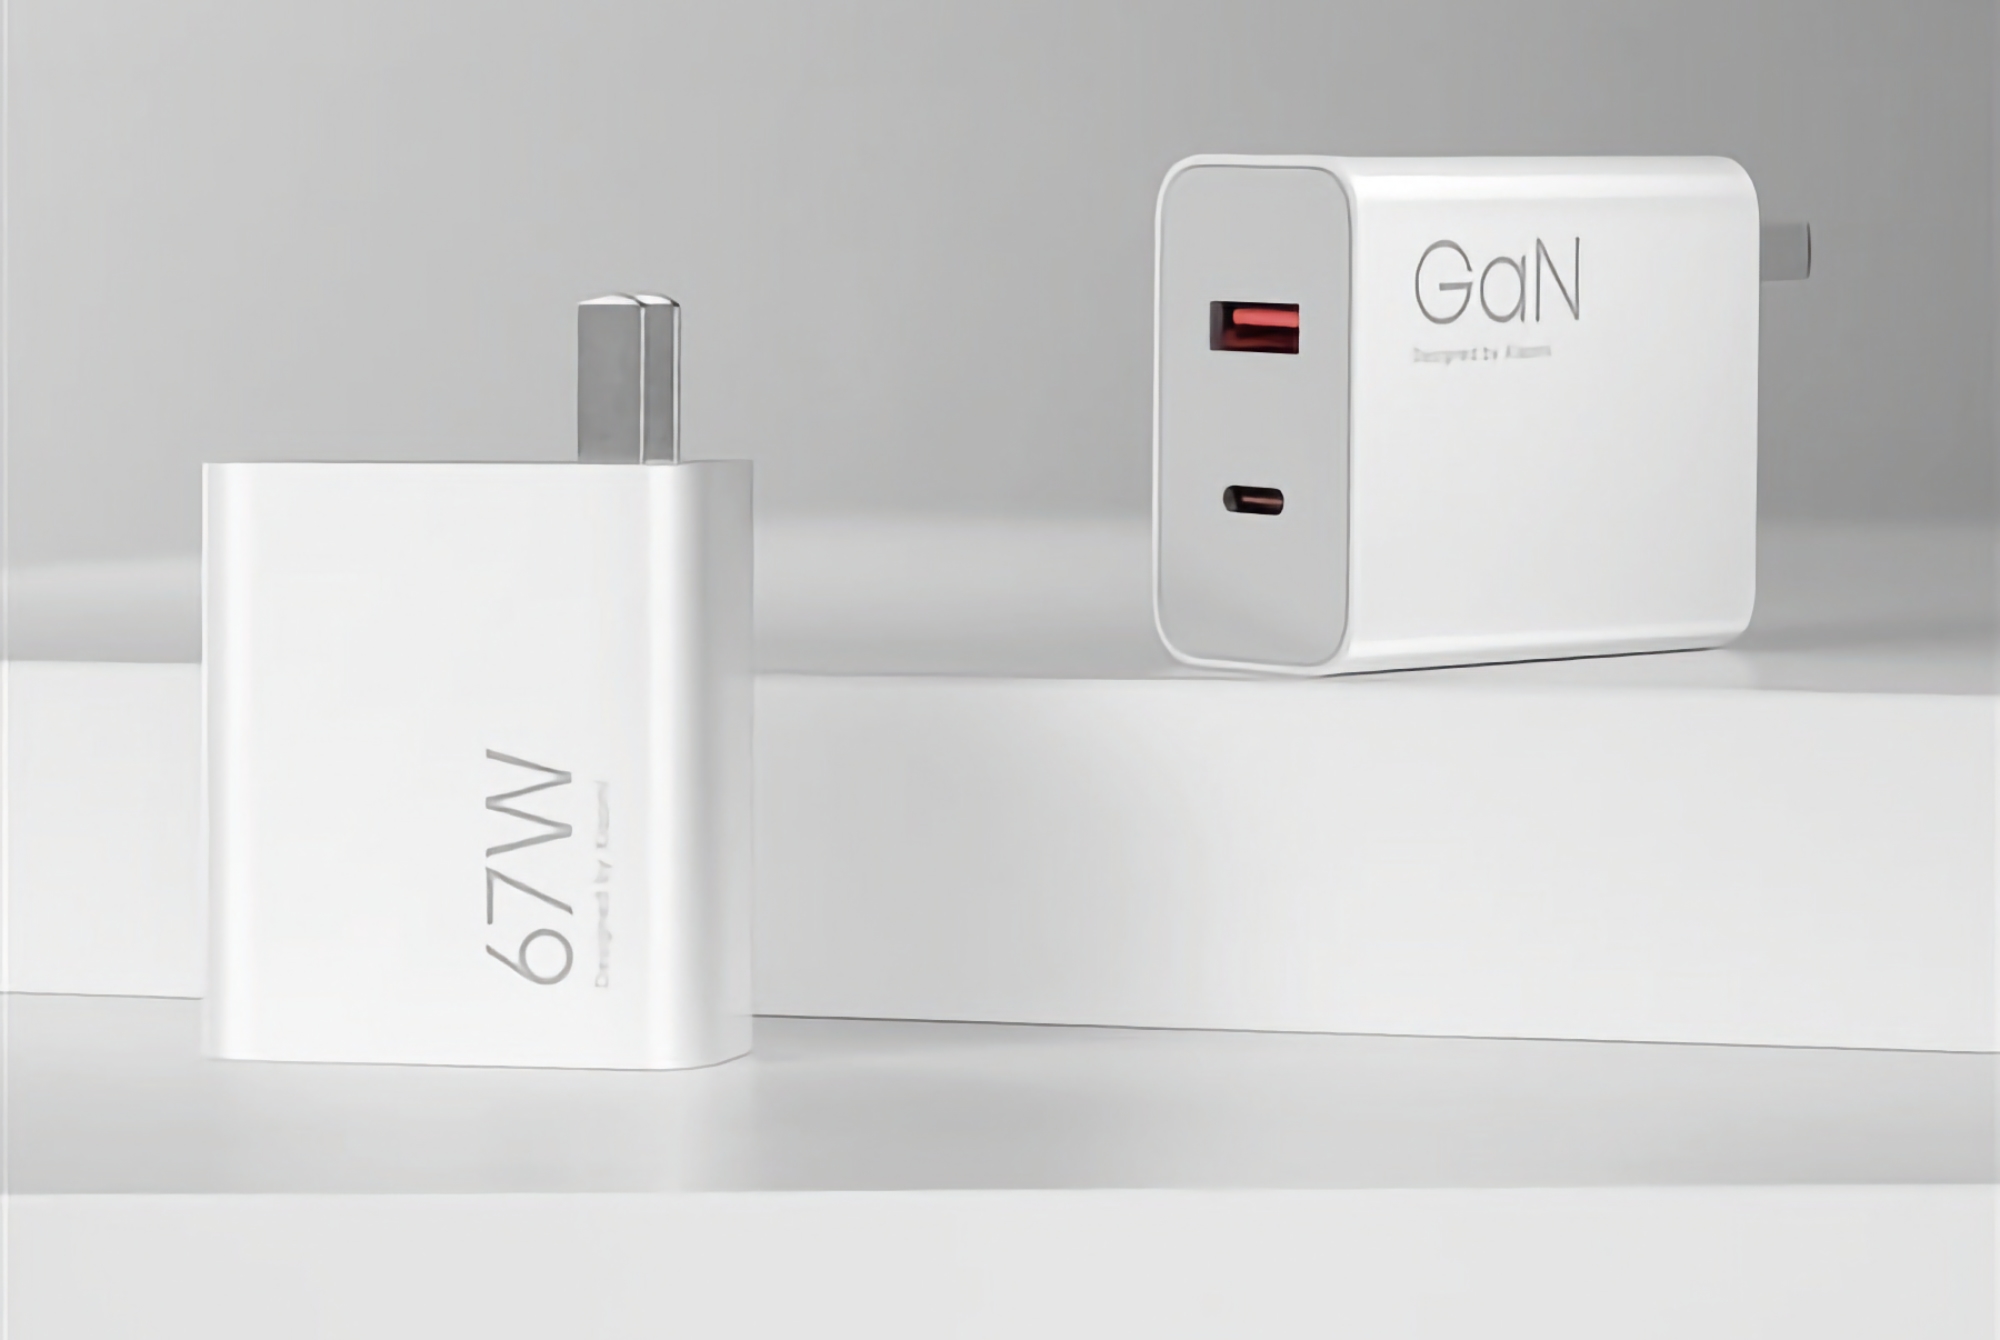 Xiaomi unveiled a 67-watt GaN charger with two USB ports and UFCS 1.0 protocol support